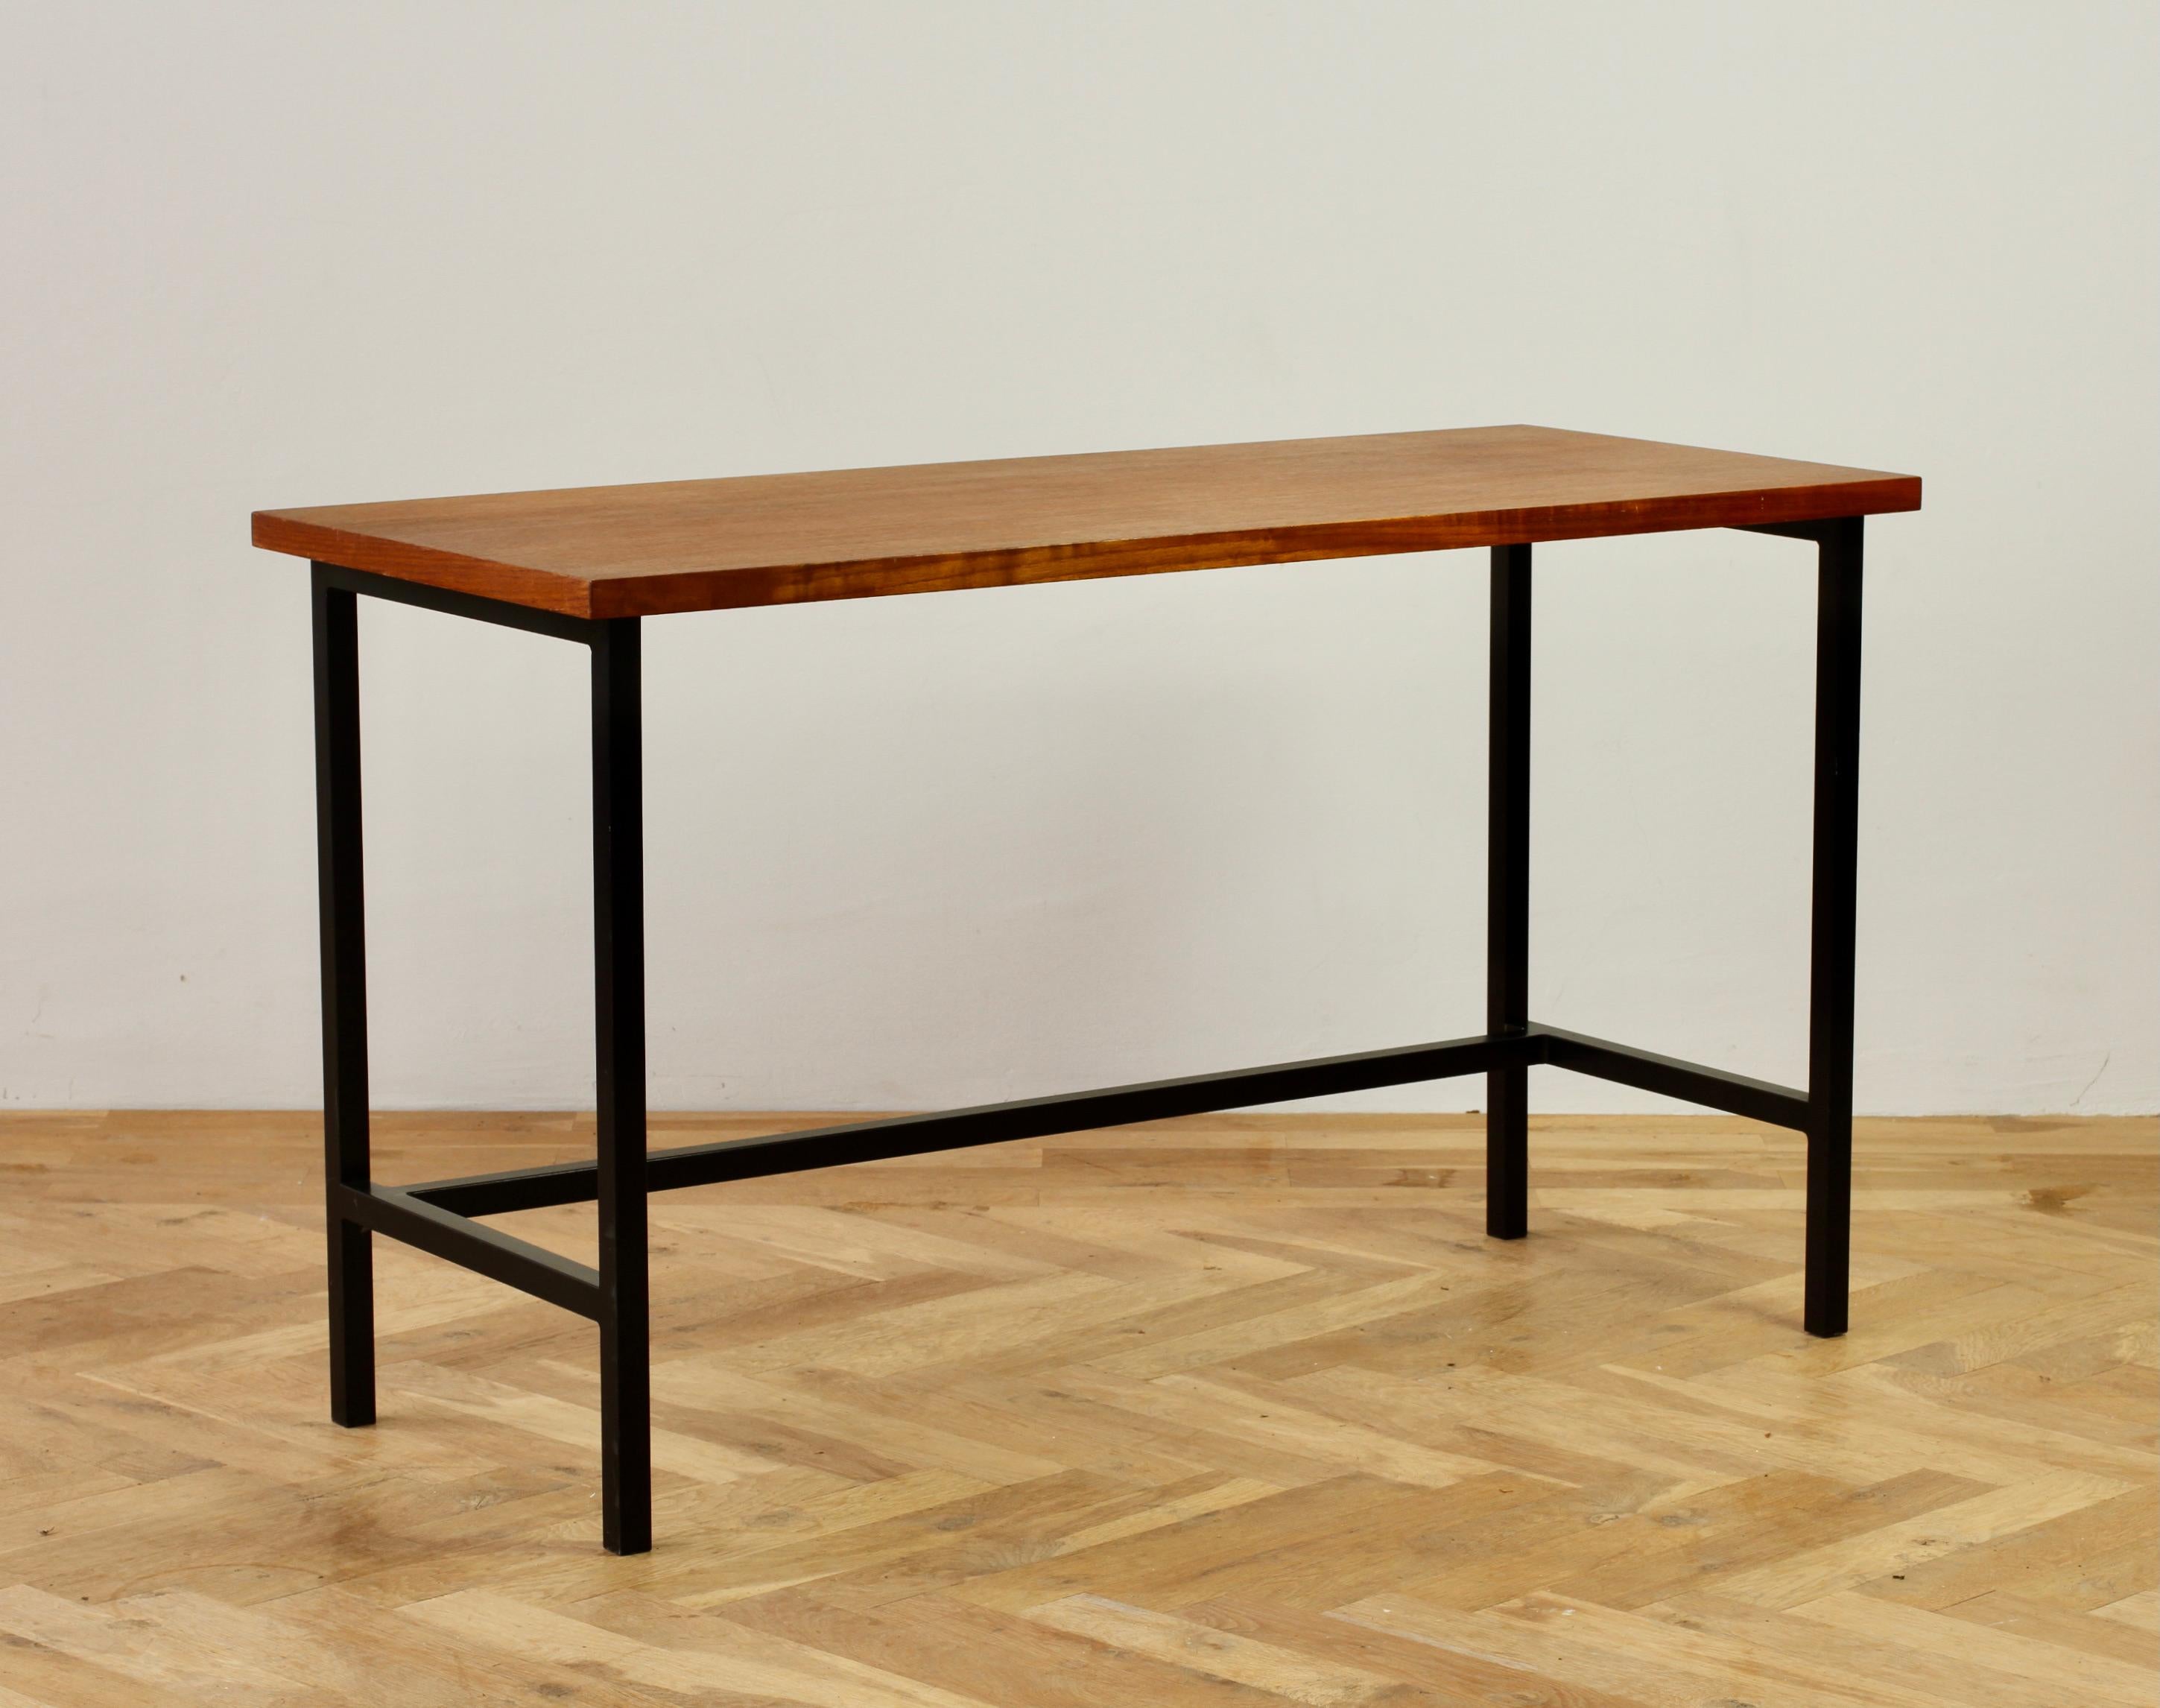 A wonderful modernist American made Mid-Century desk by Florence Knoll, circa 1950s. Made from a black painted square tubular iron frame with a veneered wood (we presume teak). This delightful table, will add warmth and character to any office